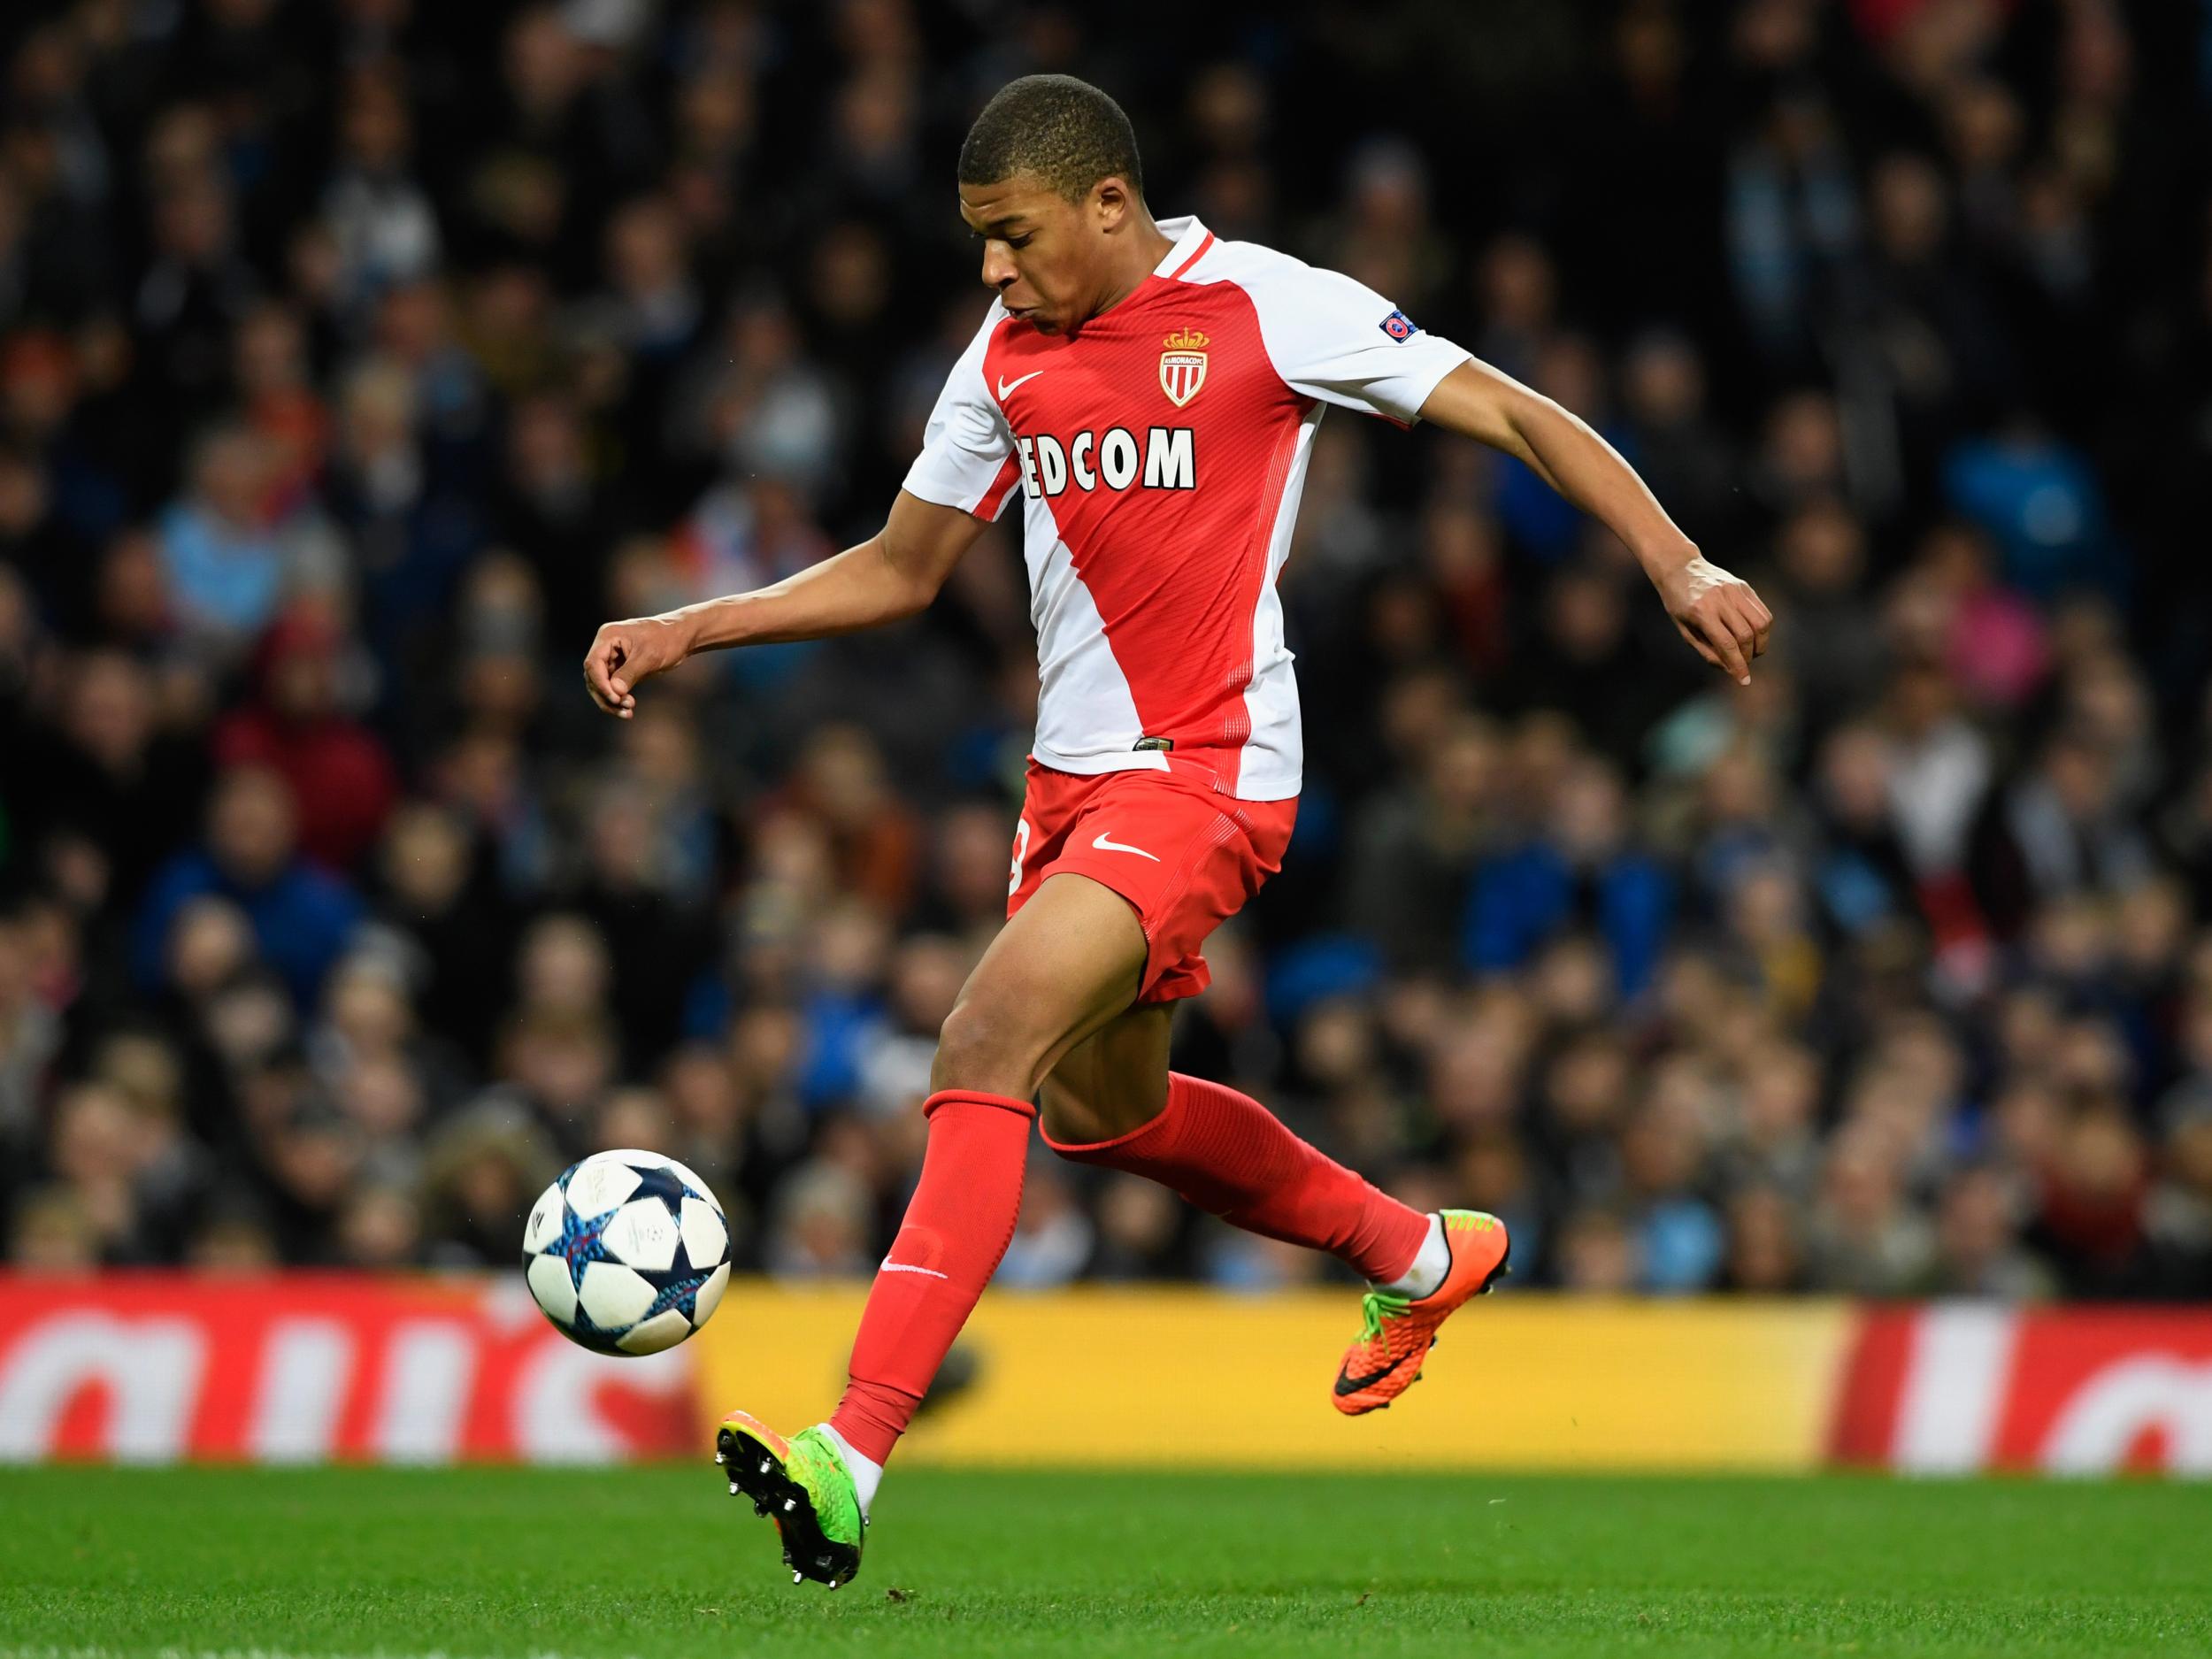 Mbappe has been the talk of Europe